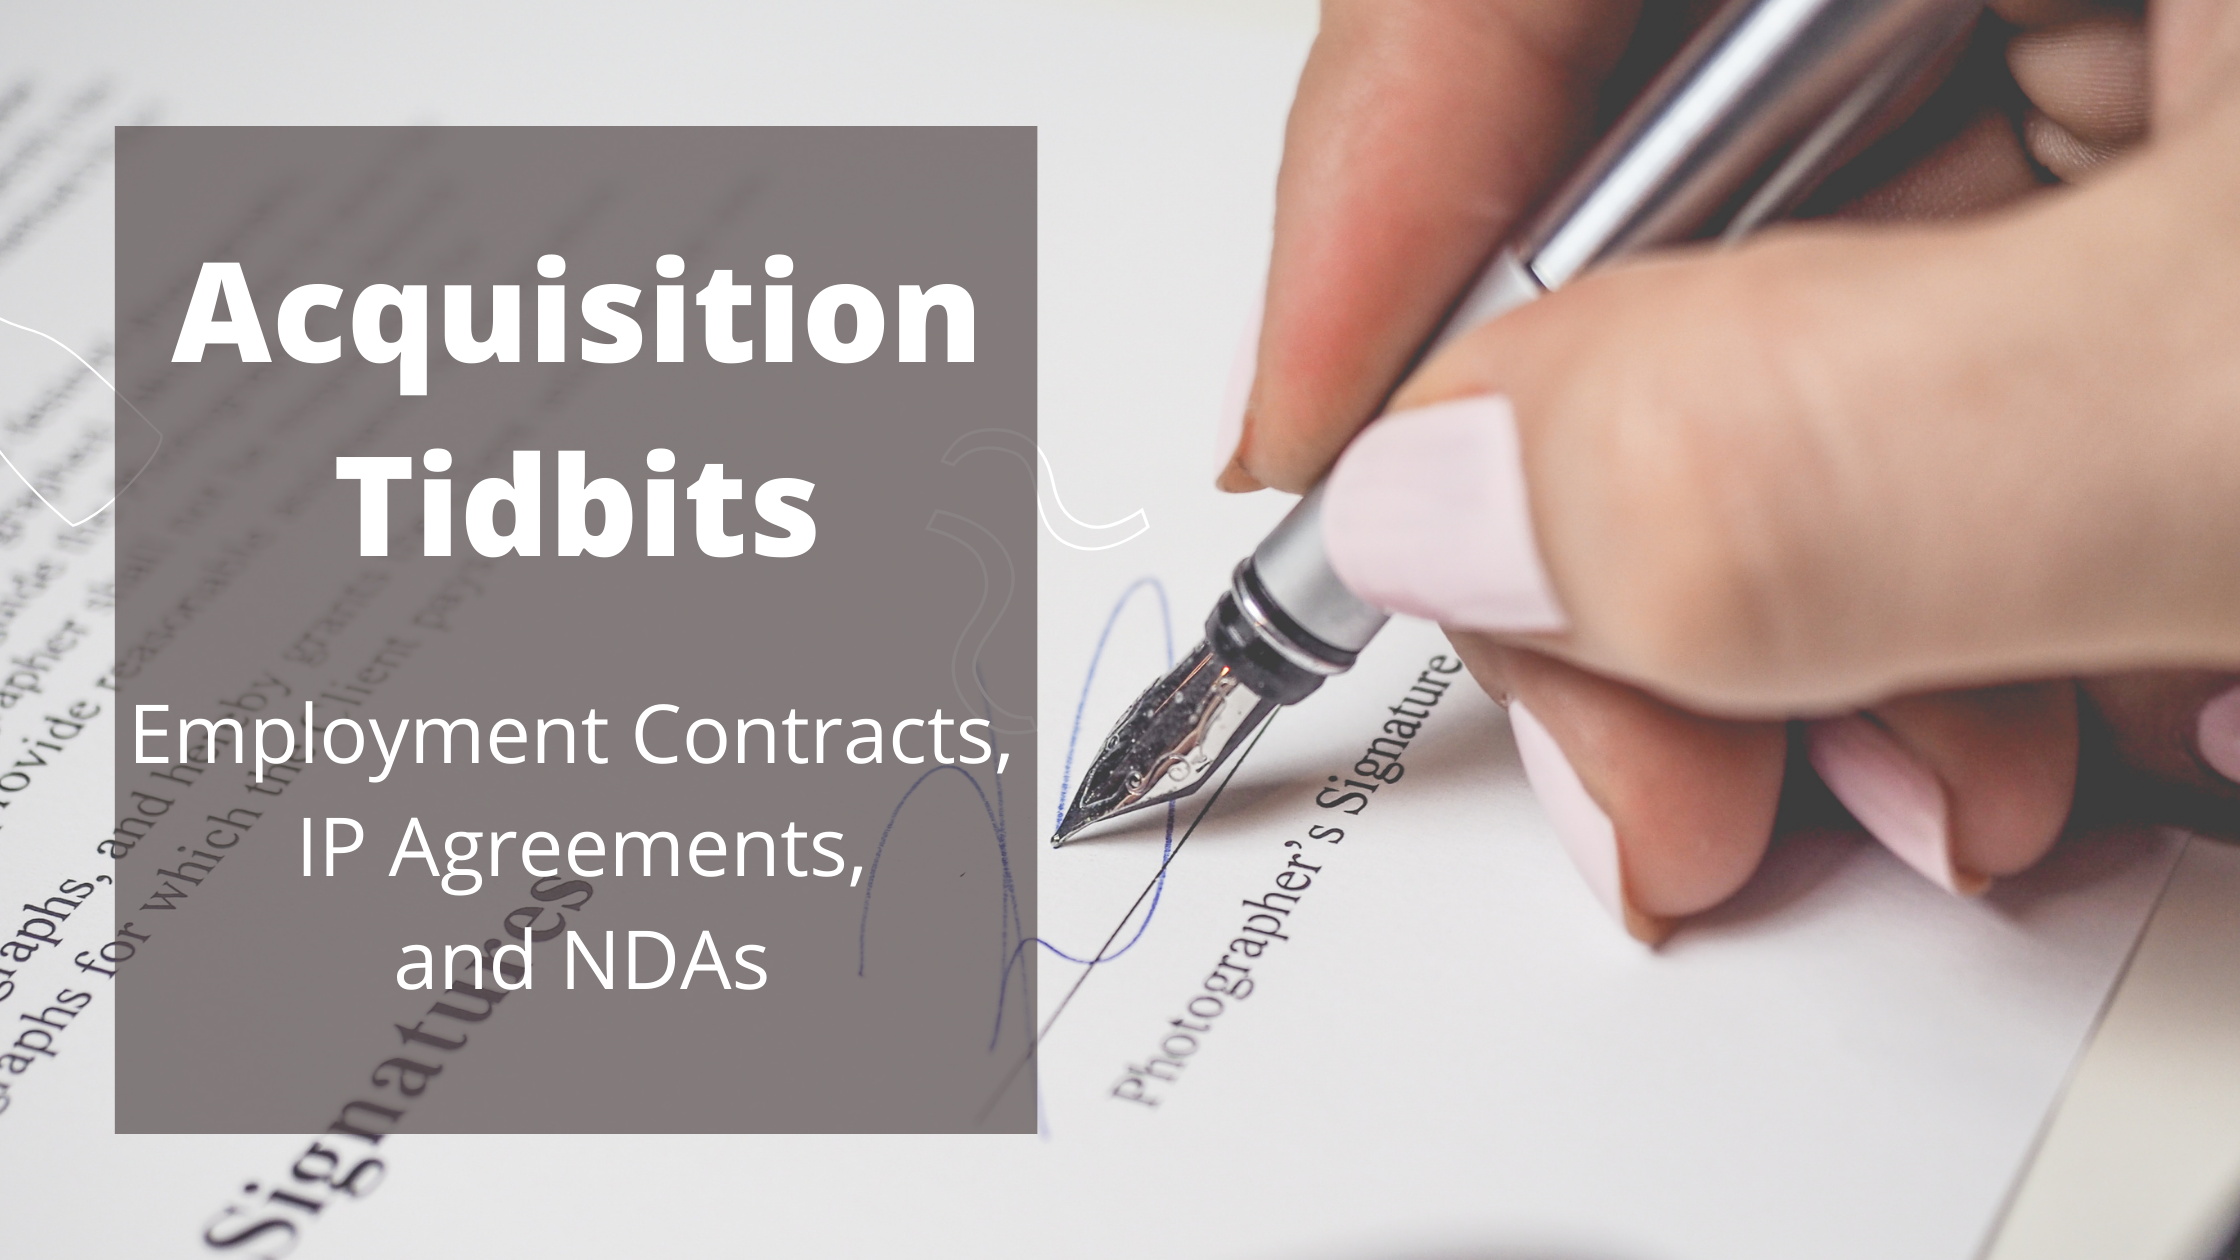 Acquisition Tidbits - Employment Contracts, IP Agreements and NDAs